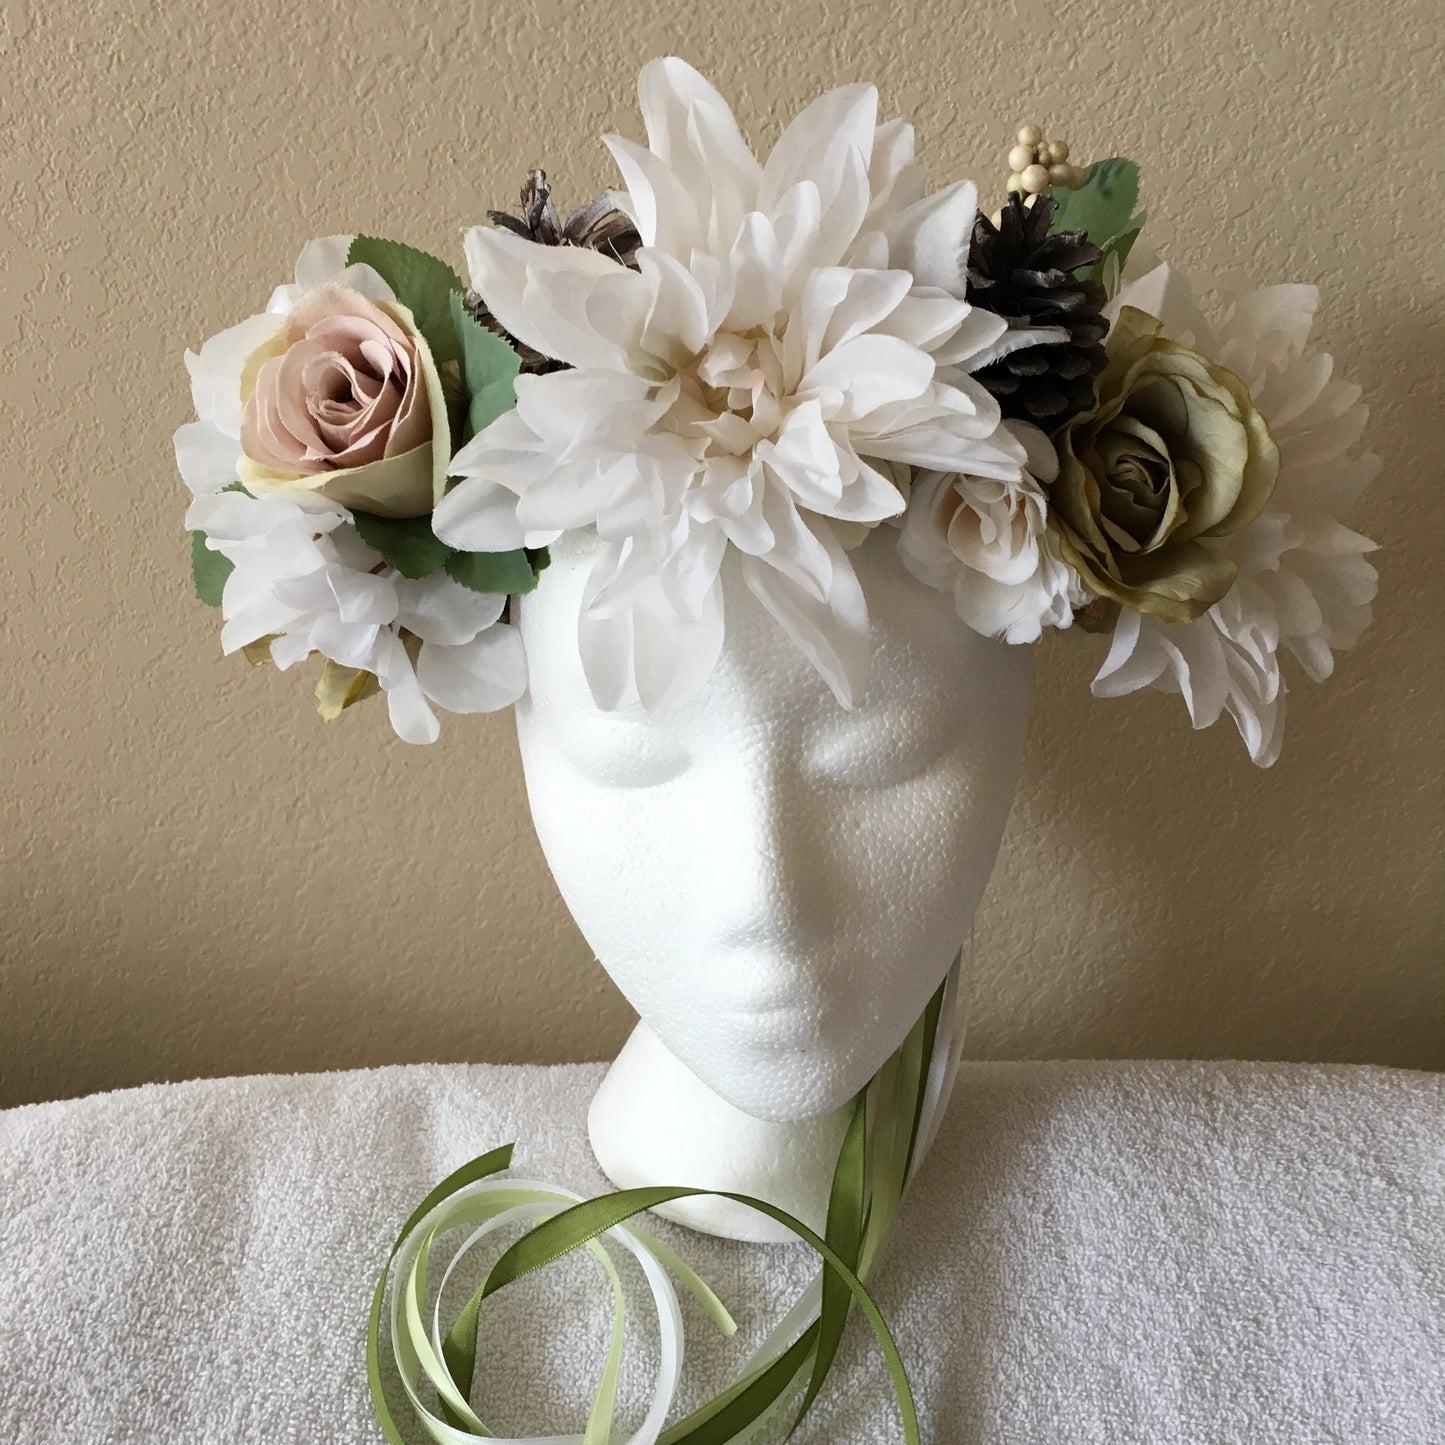 Extra Large Wreath - White & green flowers